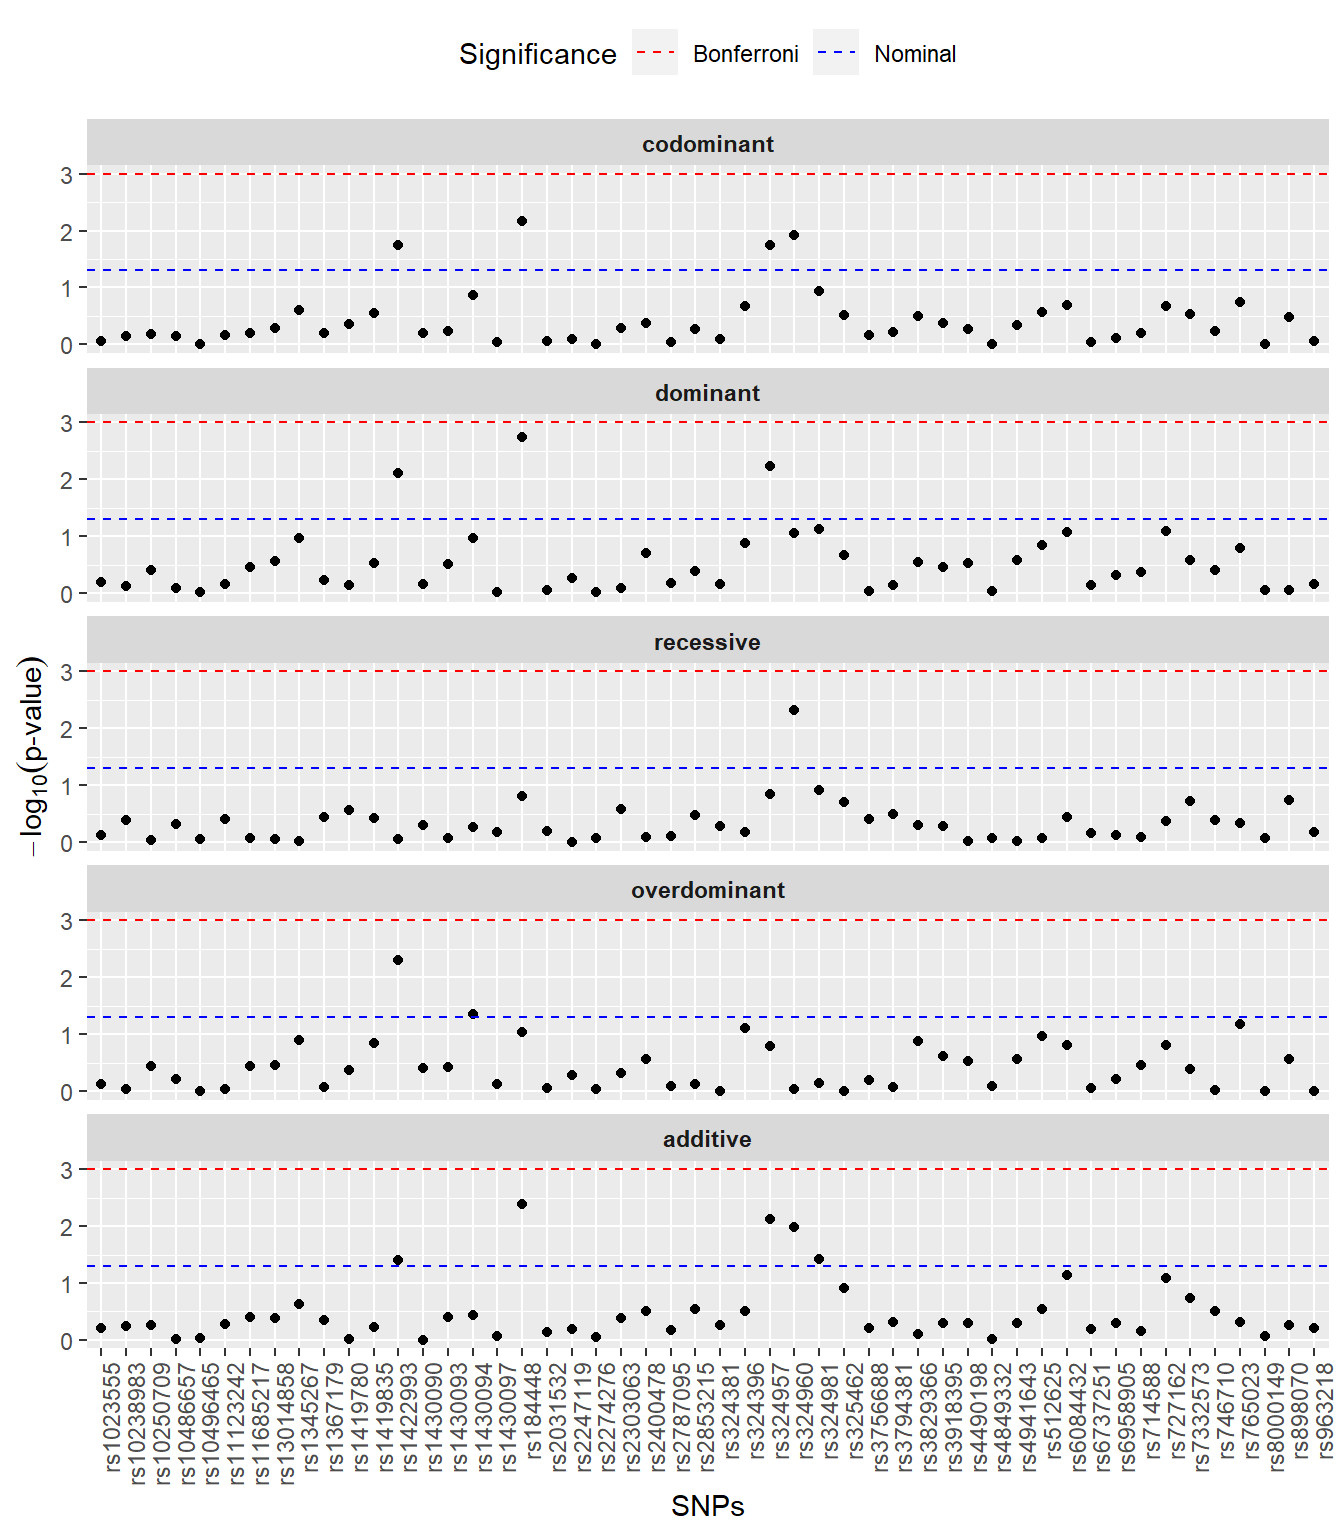 Manhattan-type plots for different genetic models. P-values in -log10 scale to assess the association between case-control status and SNPs in the asthma example.